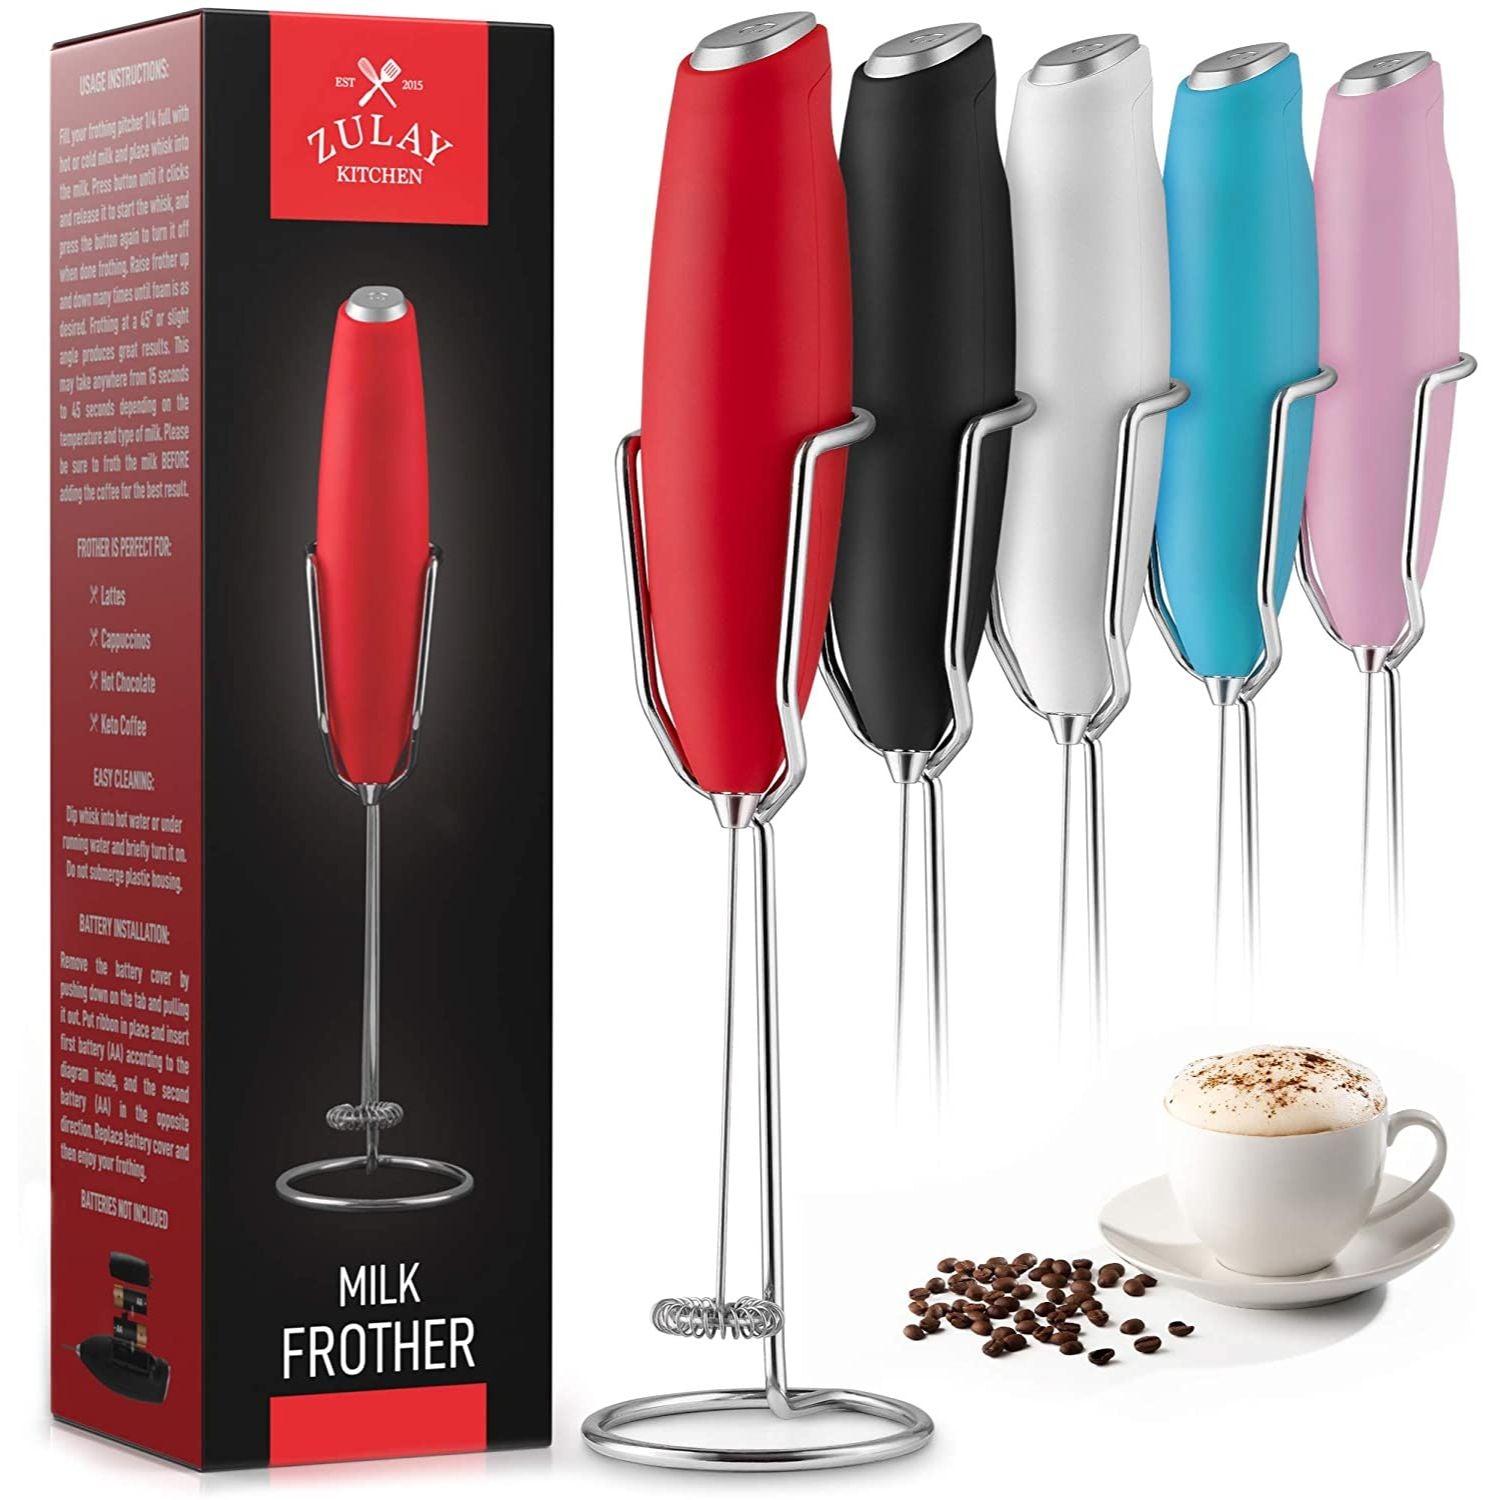 How to Use the Milk Frother